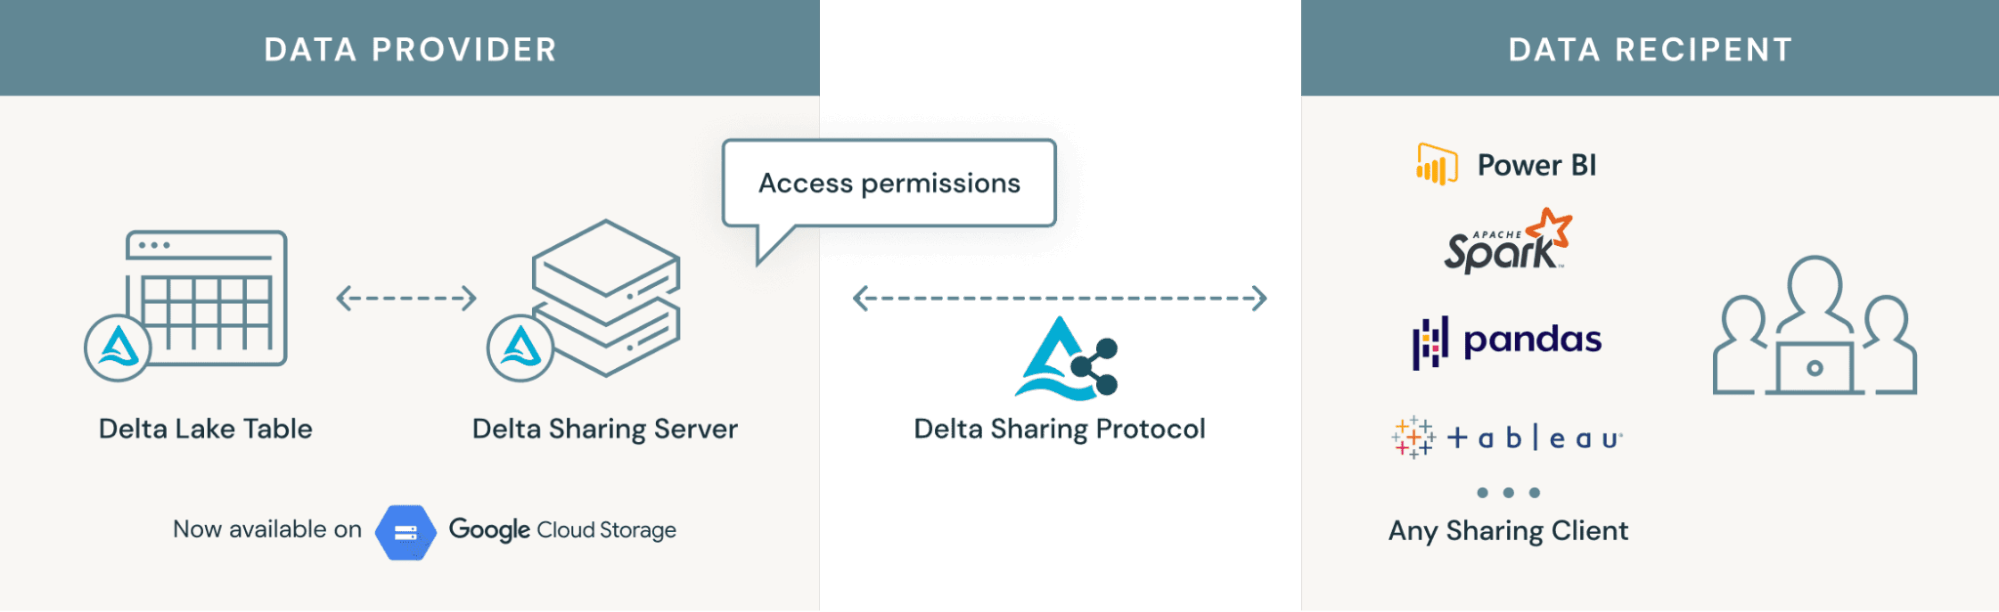 With Delta Sharing 0.4.0, you can now share Delta Tables stored on Google Cloud Storage.